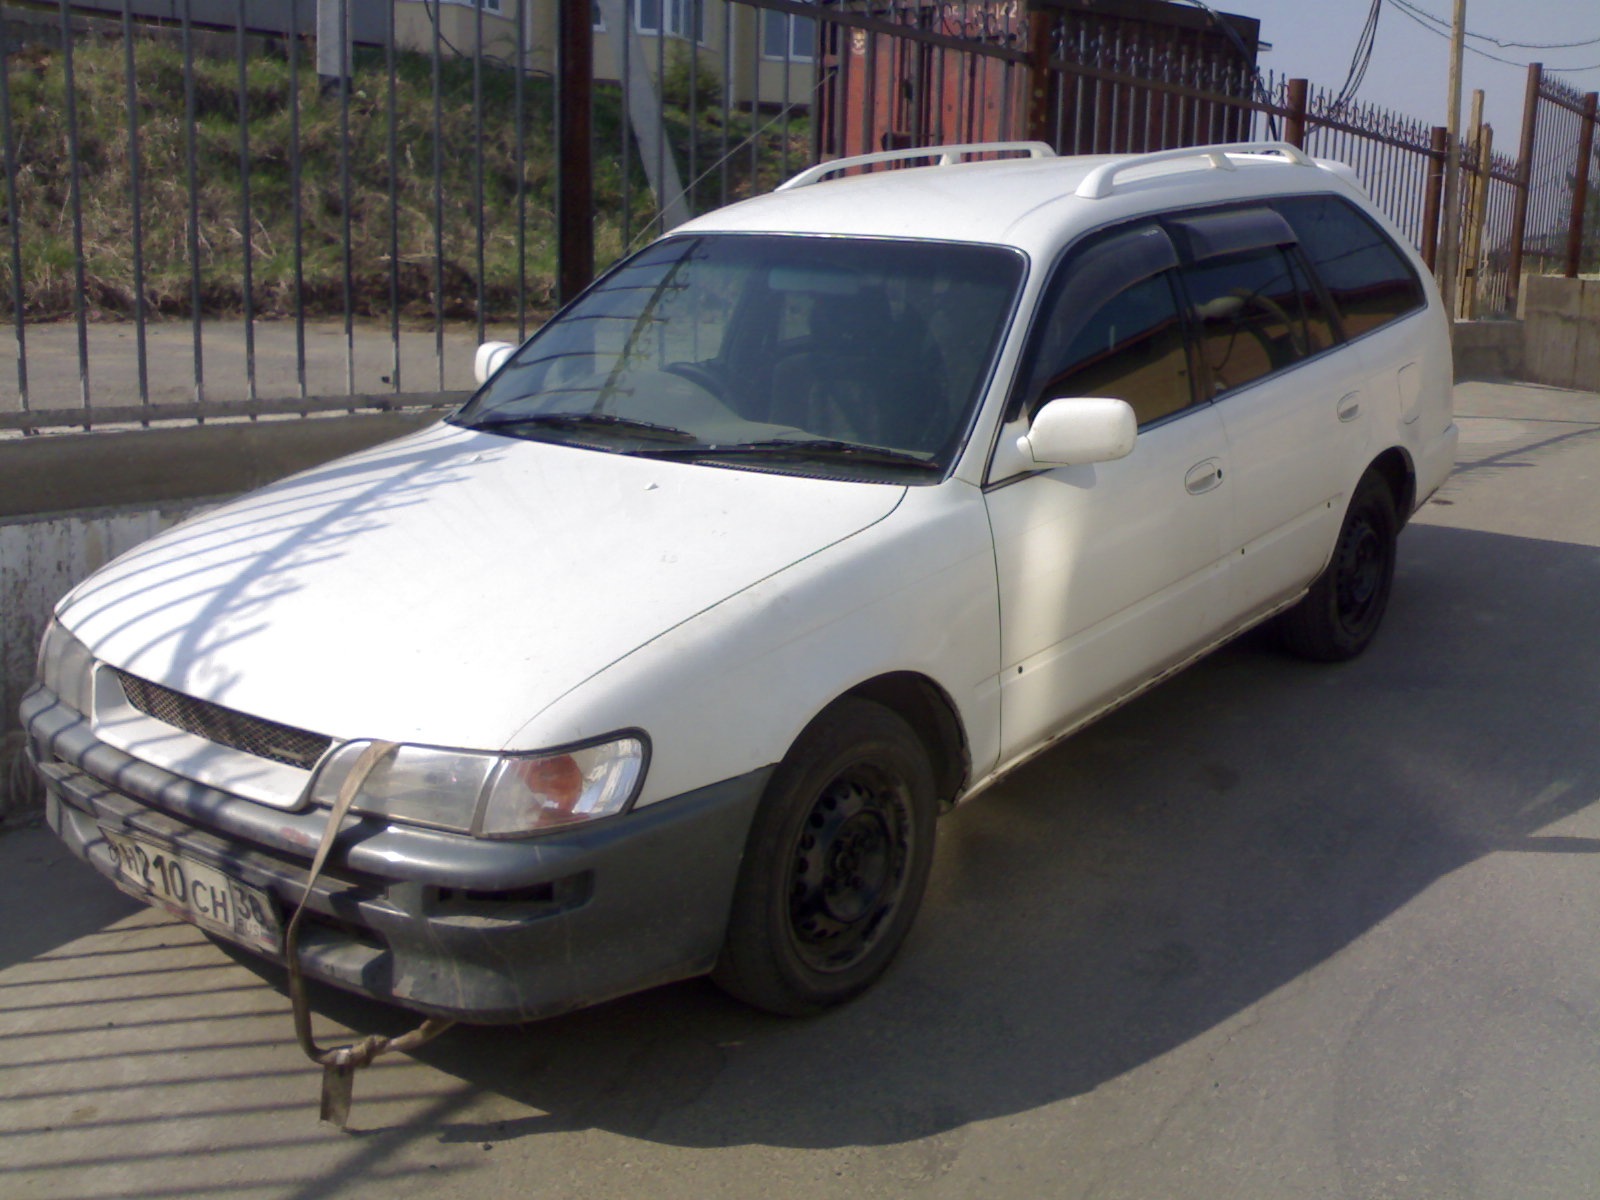 for the first time in first class - Toyota Corolla 16 liter 1997